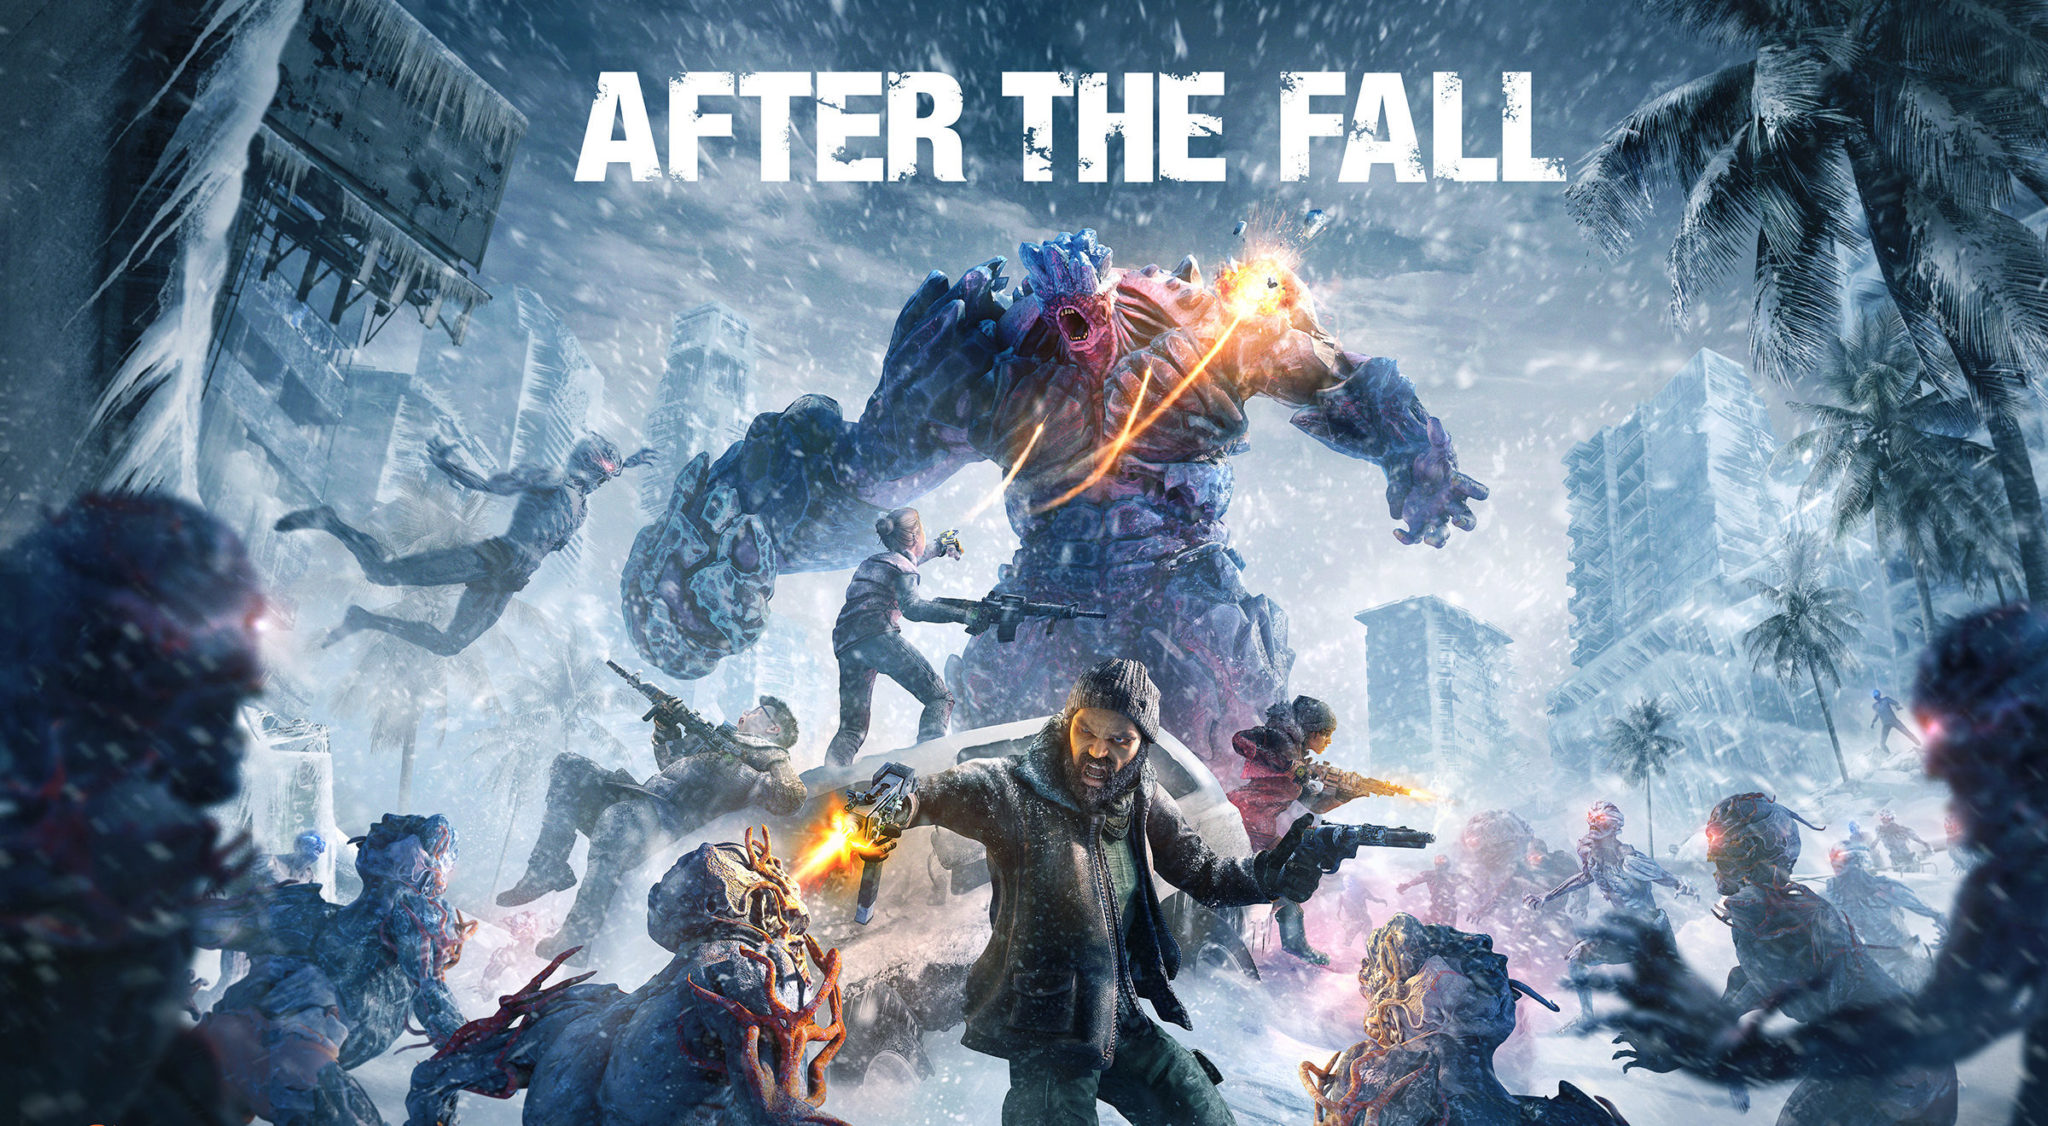 After the fall vr. Ps4 games 2022. Игры на компьютер новинки. The Fall геймплей.